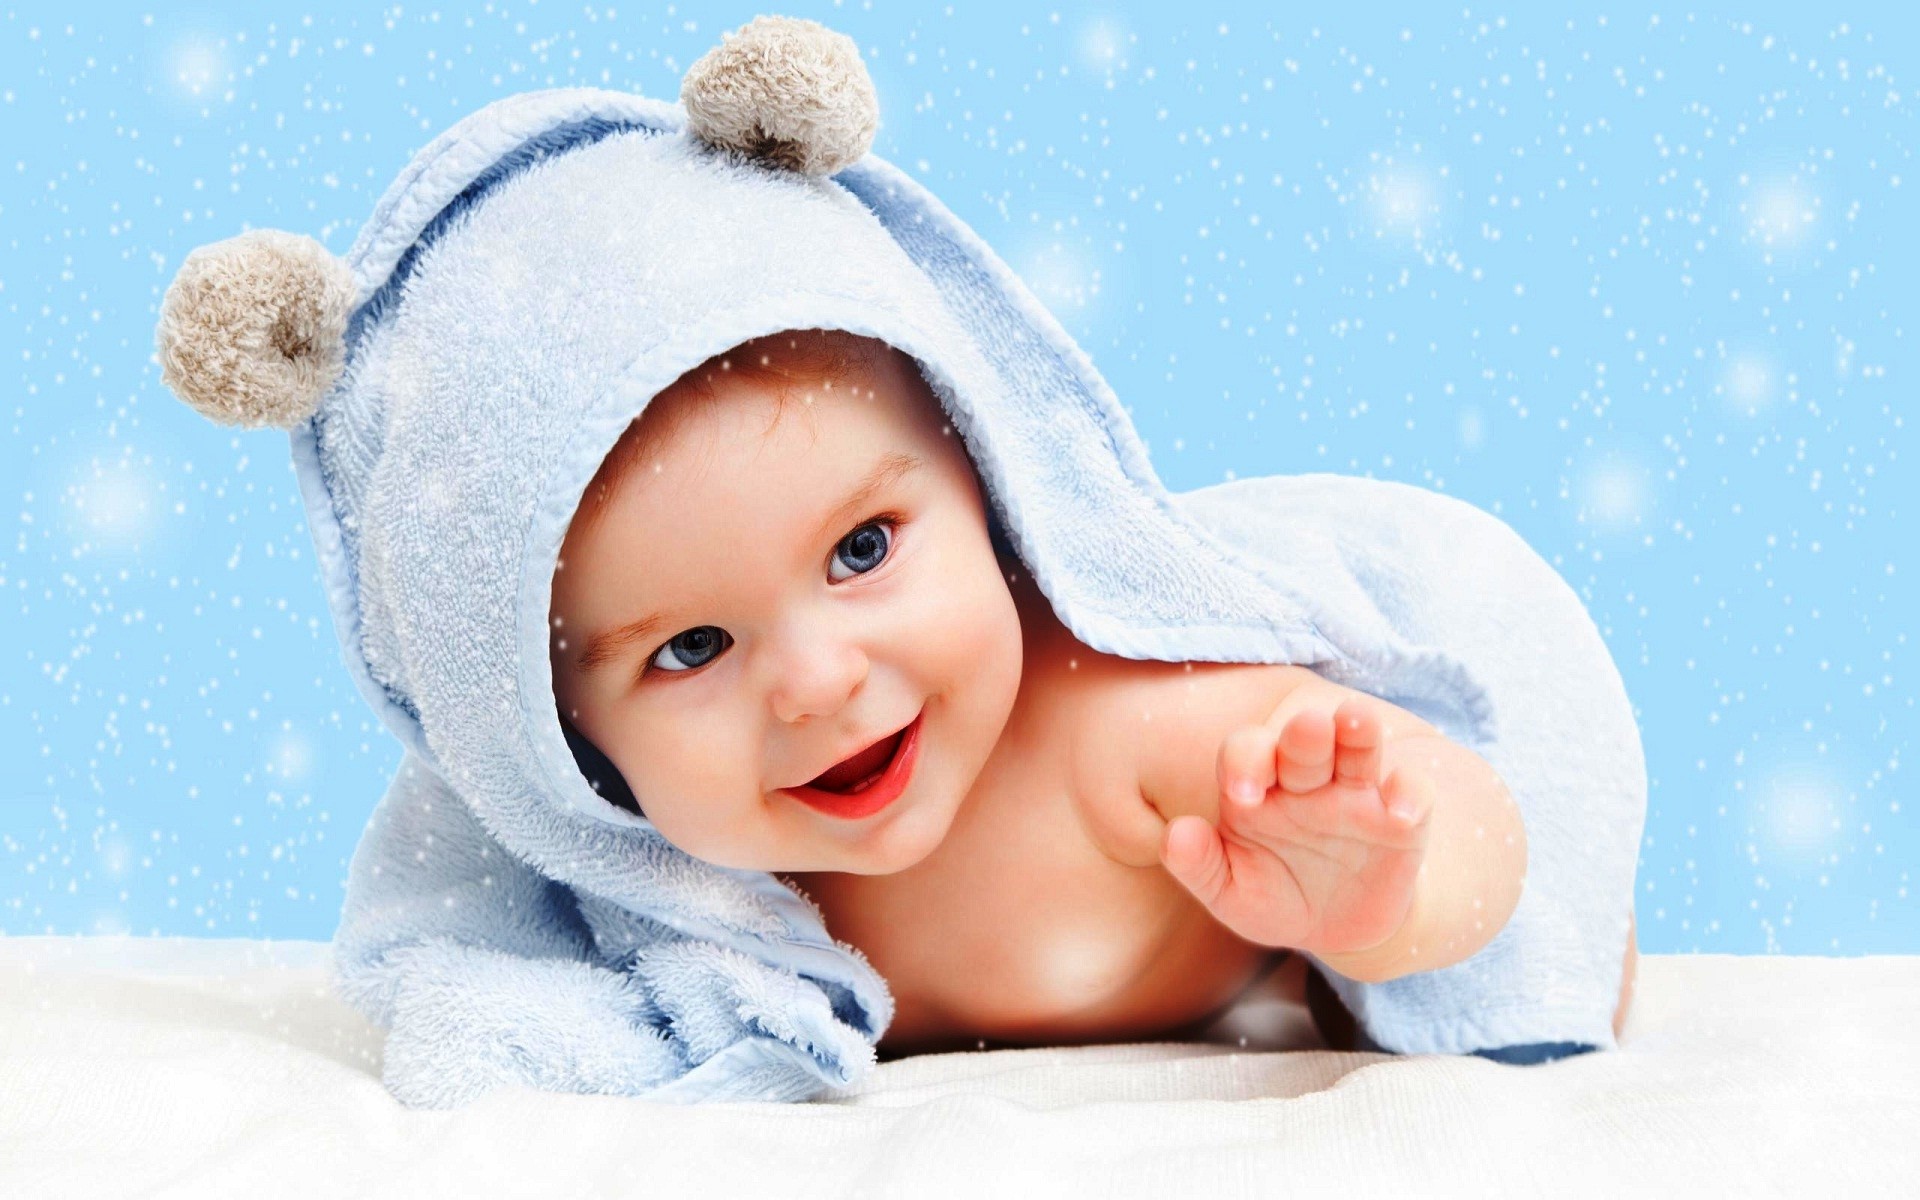 baby hd wallpapers 1080p,child,baby,skin,toddler,headgear